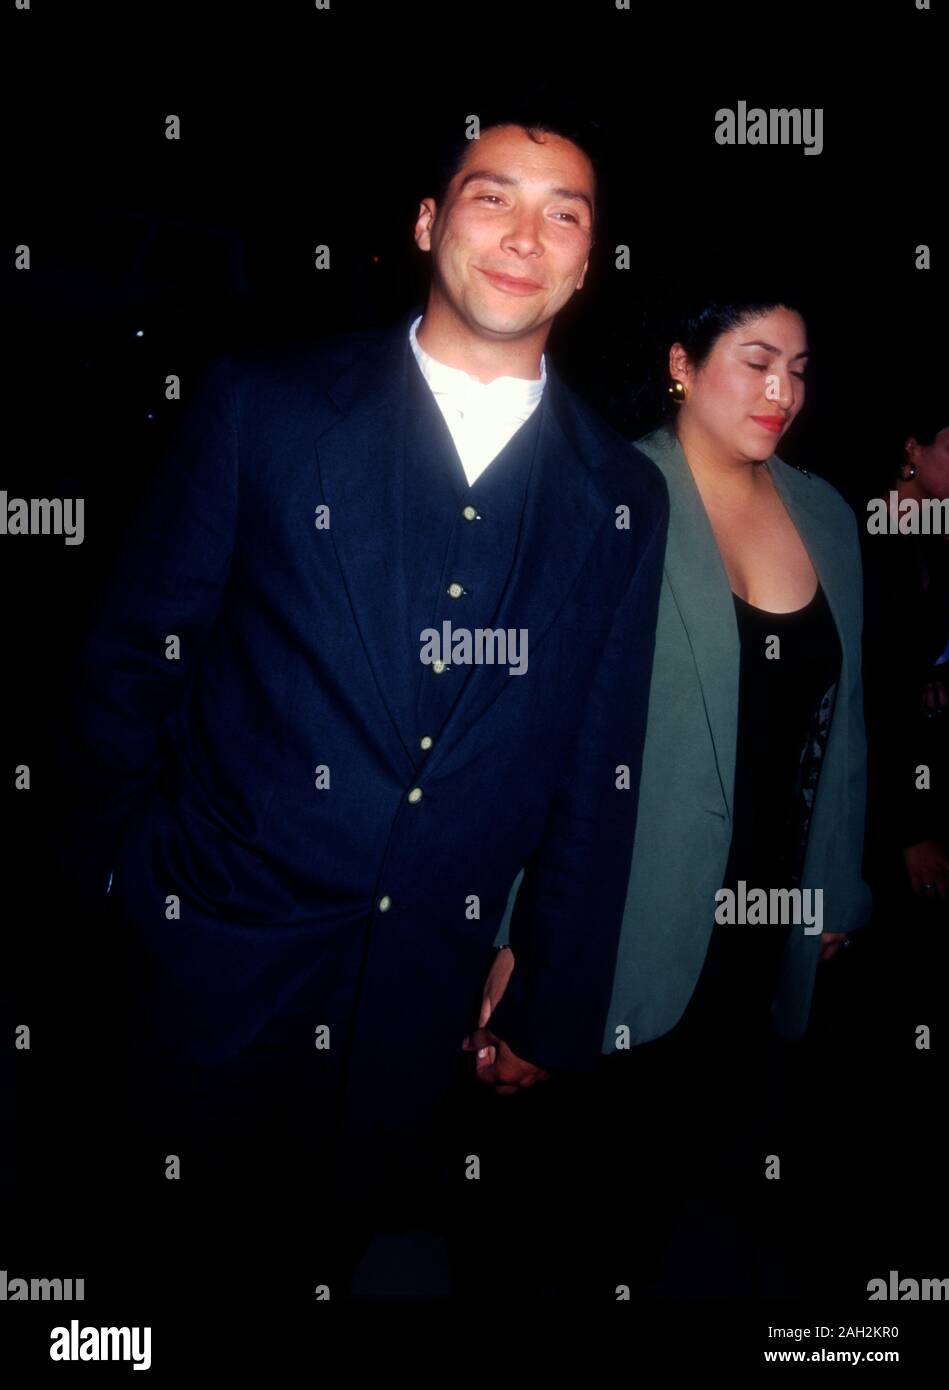 Hollywood, California, USA 27th April 1995 Actor Benito Martinez attends New Line Cinema's 'My Family' Premiere on April 27, 1995 at Pacific's Cinerama Dome in Hollywood, California, USA. Photo by Barry King/Alamy Stock Photo Stock Photo